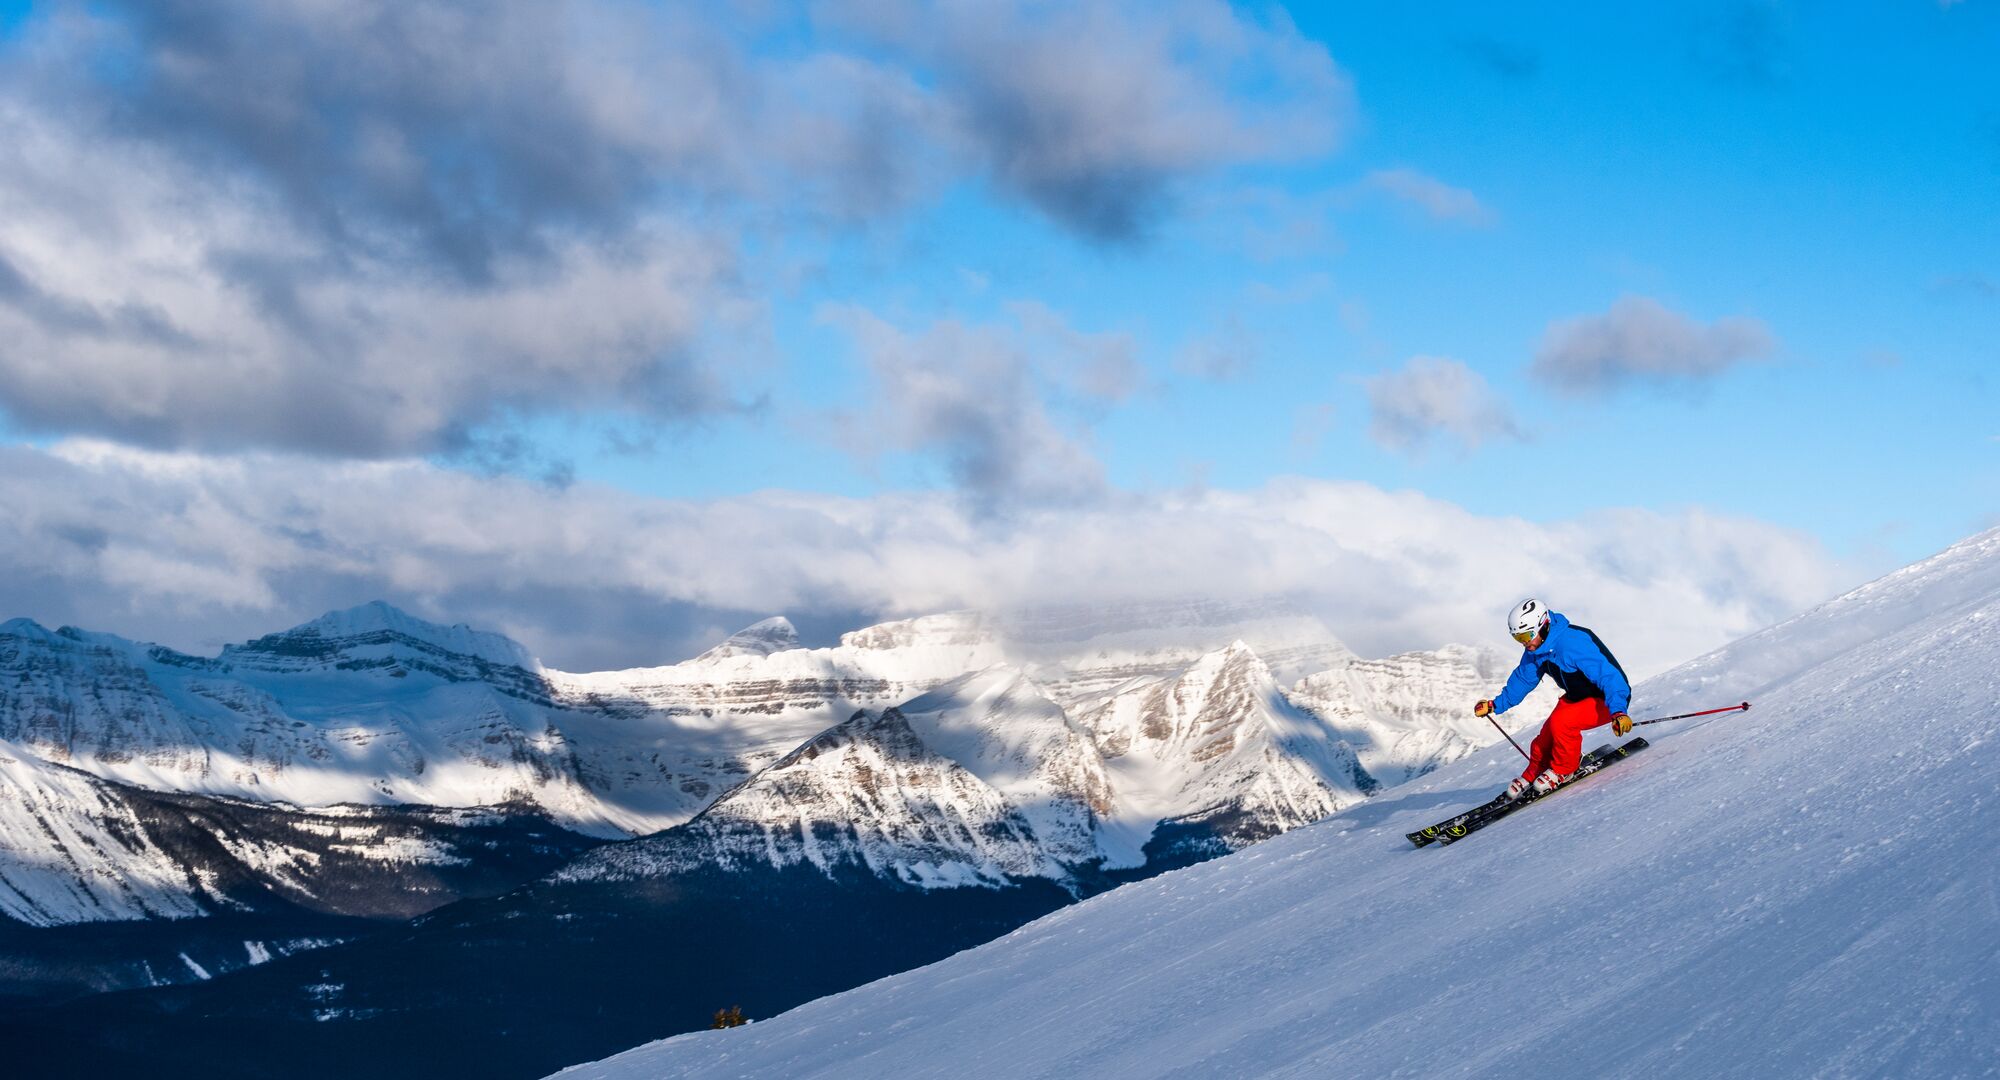 A skier on a run at the Lake Louise Ski Resort with mountains in the background in the winter.